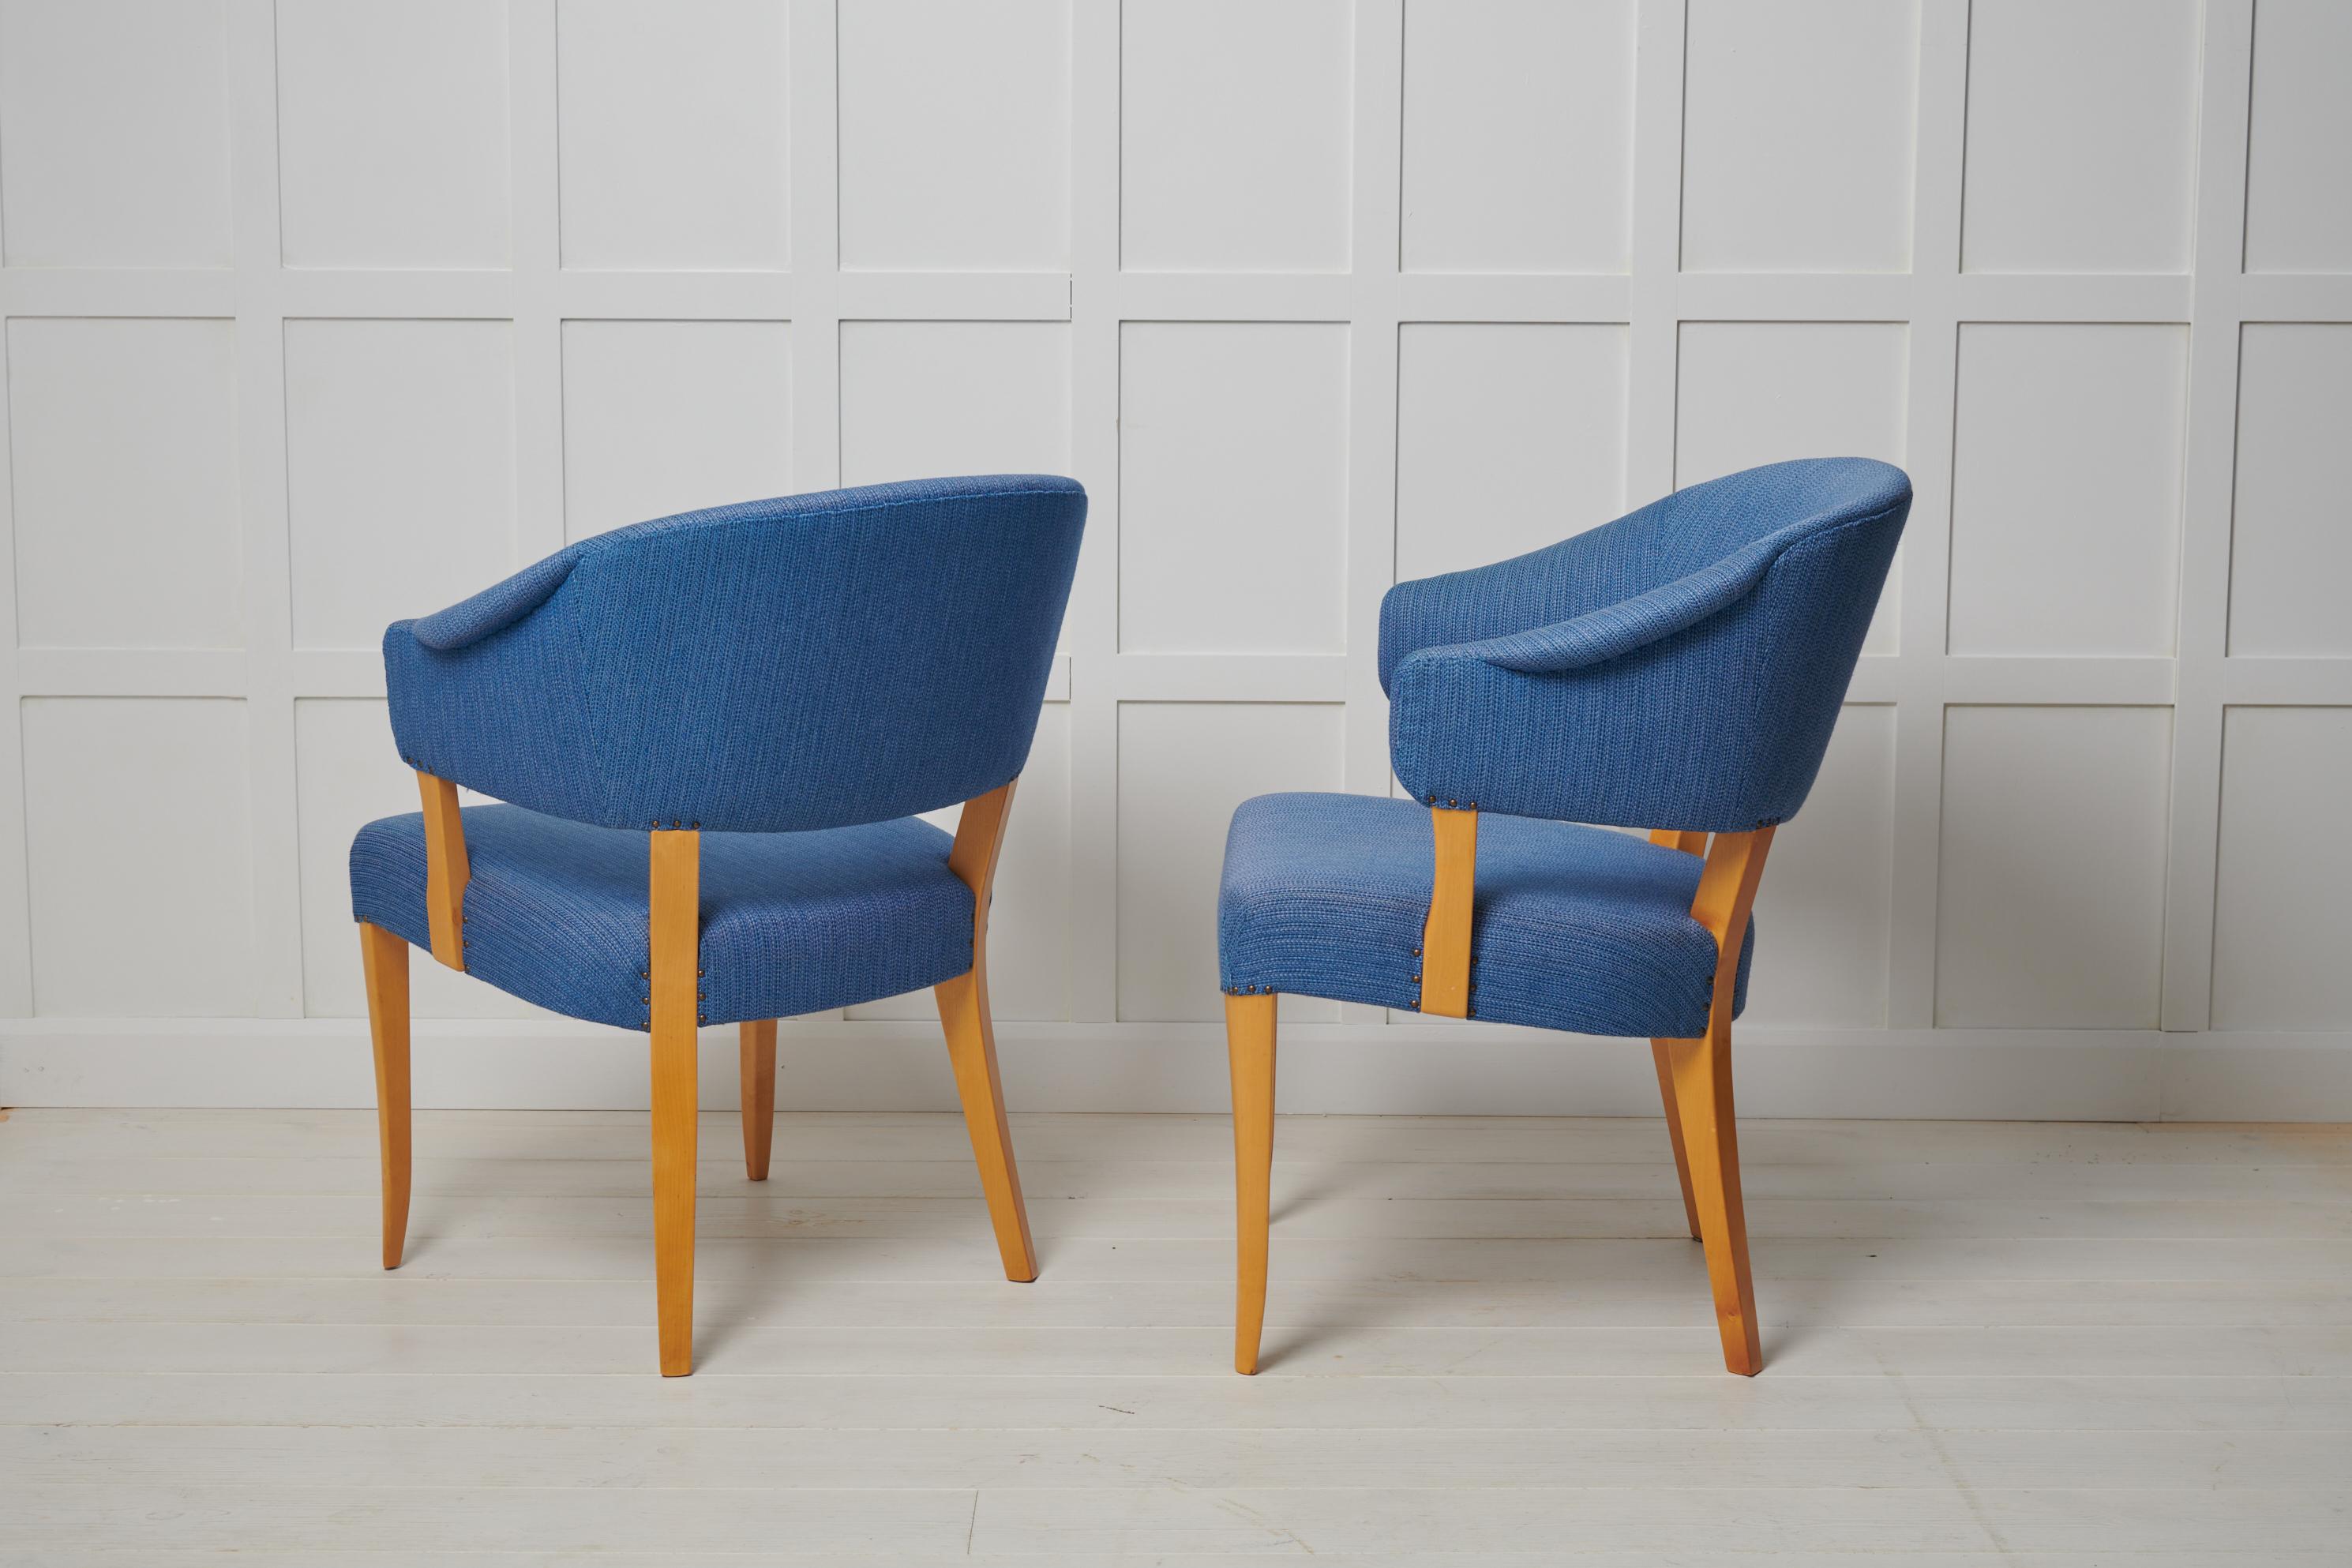 Scandinavian Modern by Carl Malmsten ”Lata Greven” Pair of Chairs  In Good Condition For Sale In Kramfors, SE